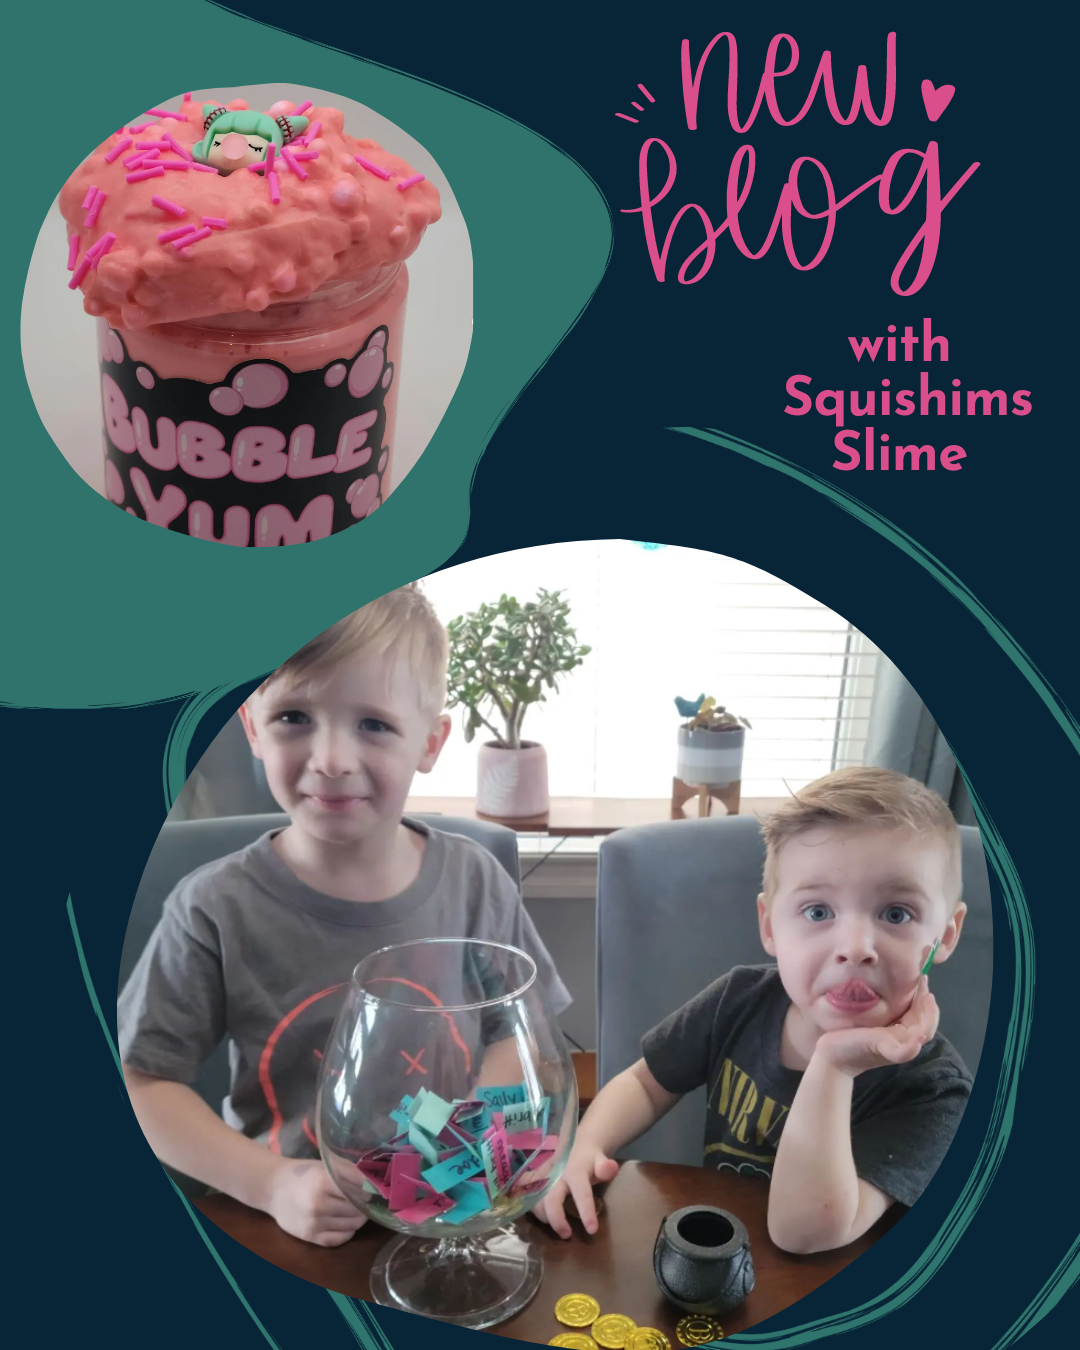 Squishims Slime brings the fun to QCGifts.ca